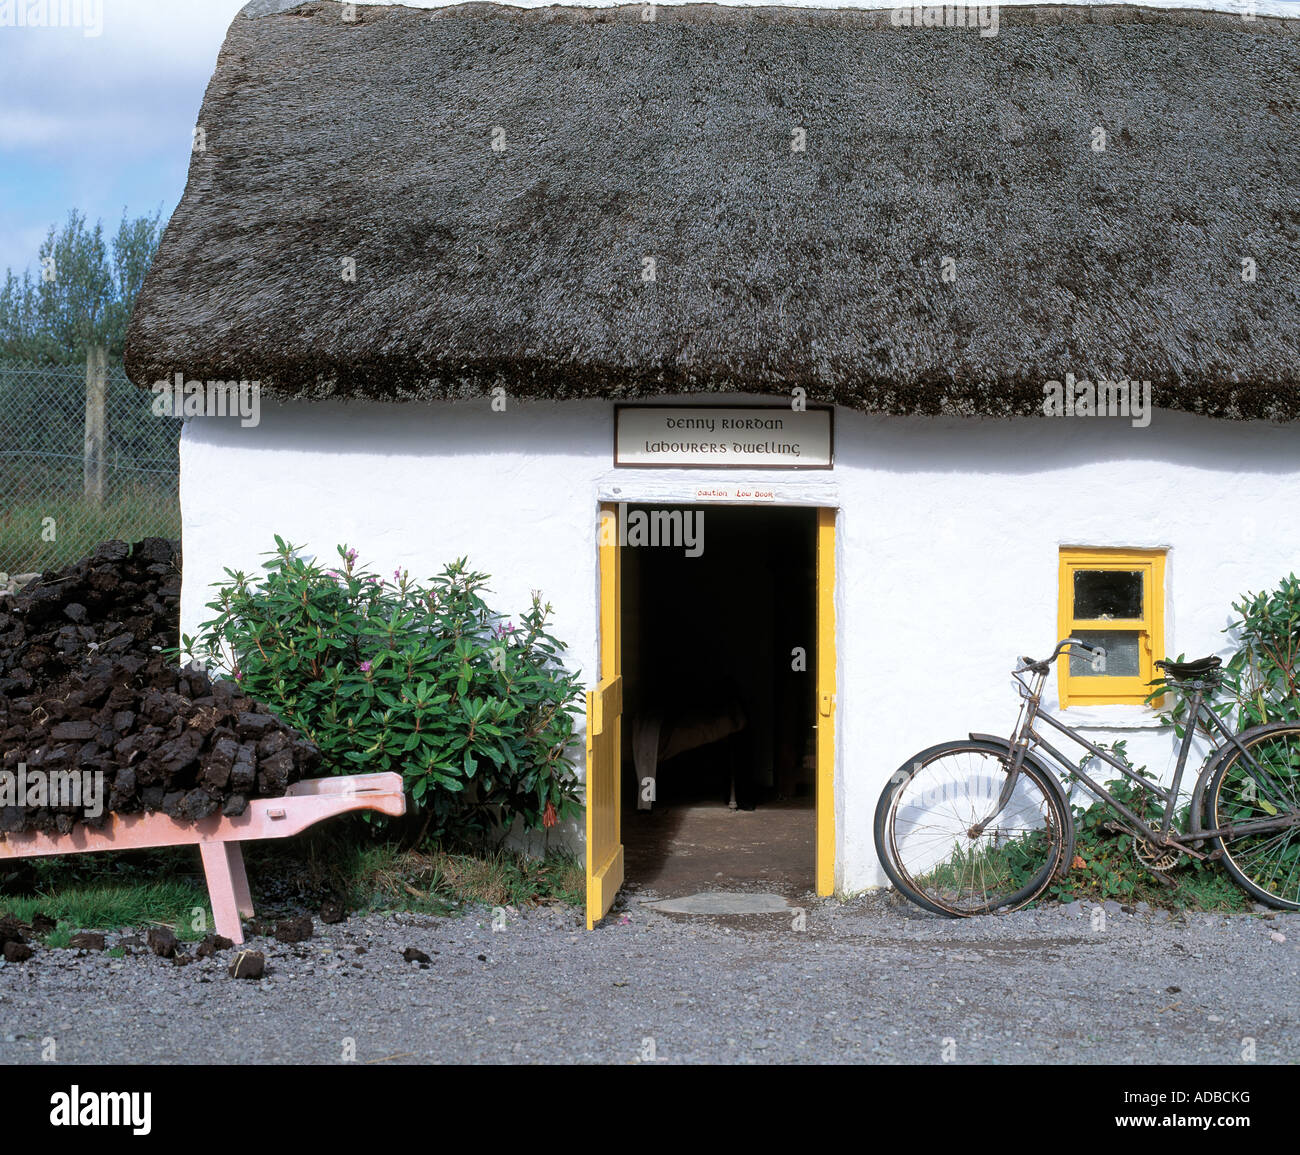 kerry bog village museum, ring of kerry, county kerry, ring of kerry irish  rural thatched building Stock Photo - Alamy